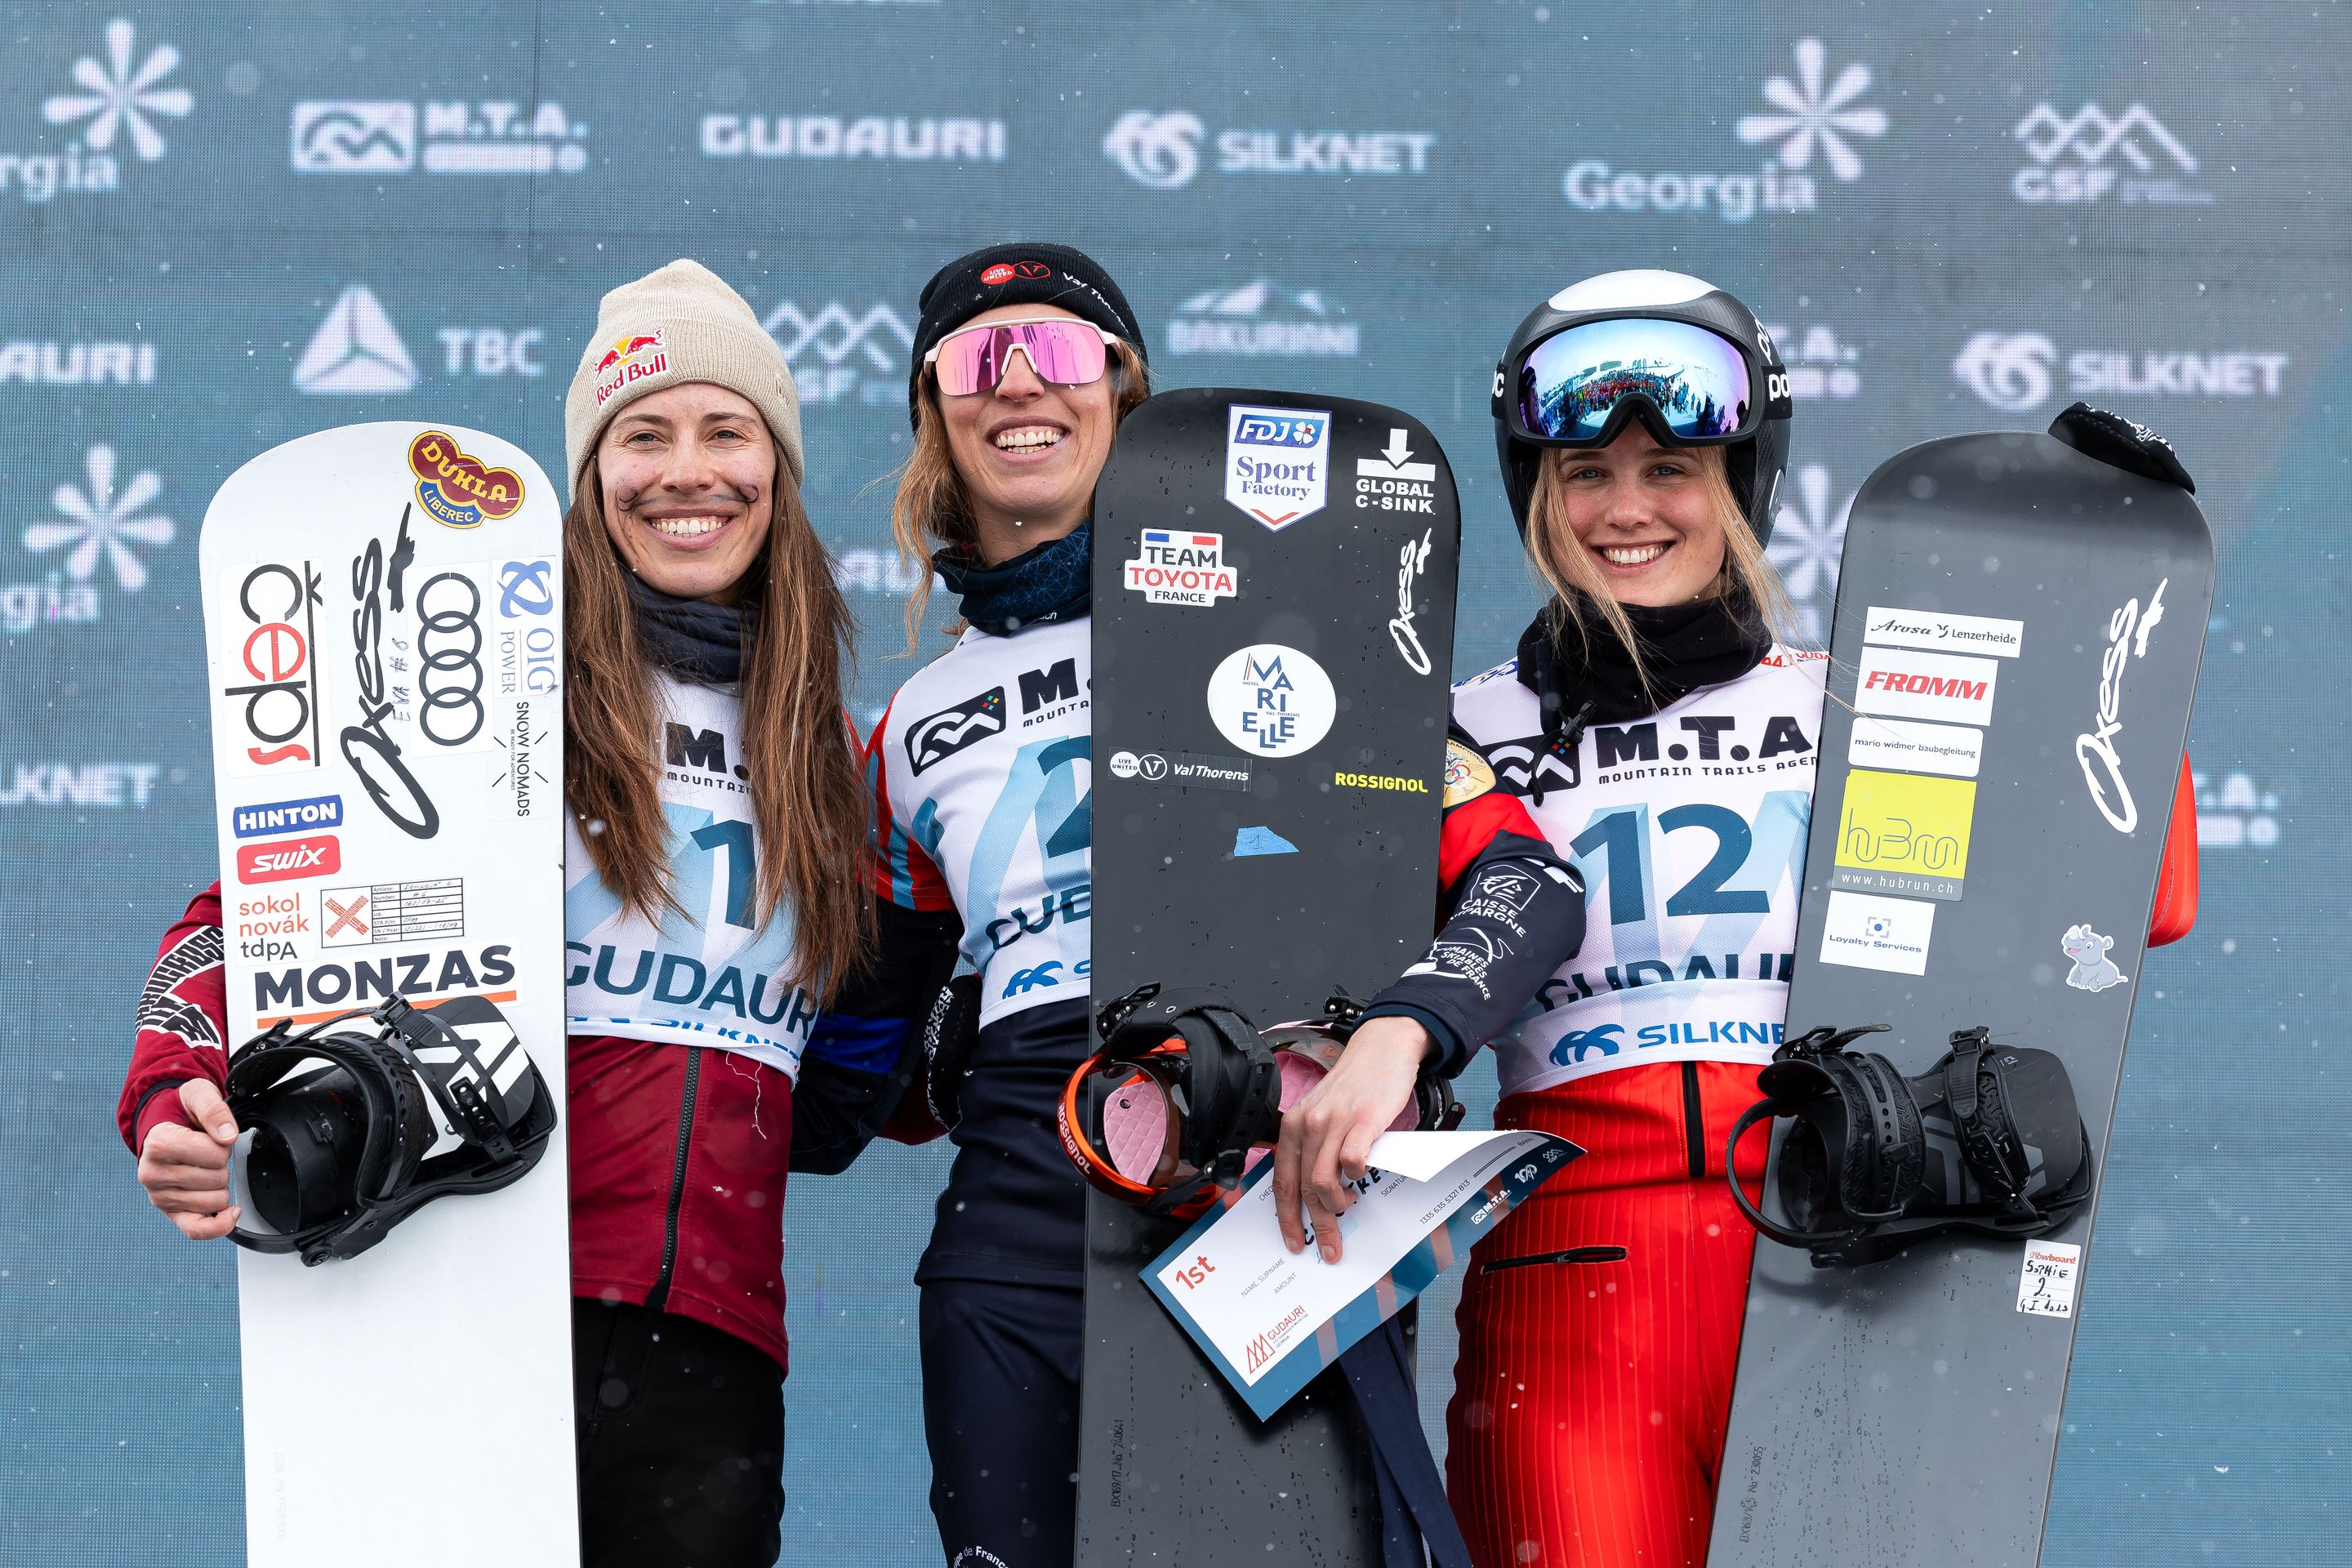 Chloe Trespeuch (FRA) tops the podium ahead of Eva Adamczykova (CZE) and Sophie Hediger (SUI).. © Miha Matavz/FIS